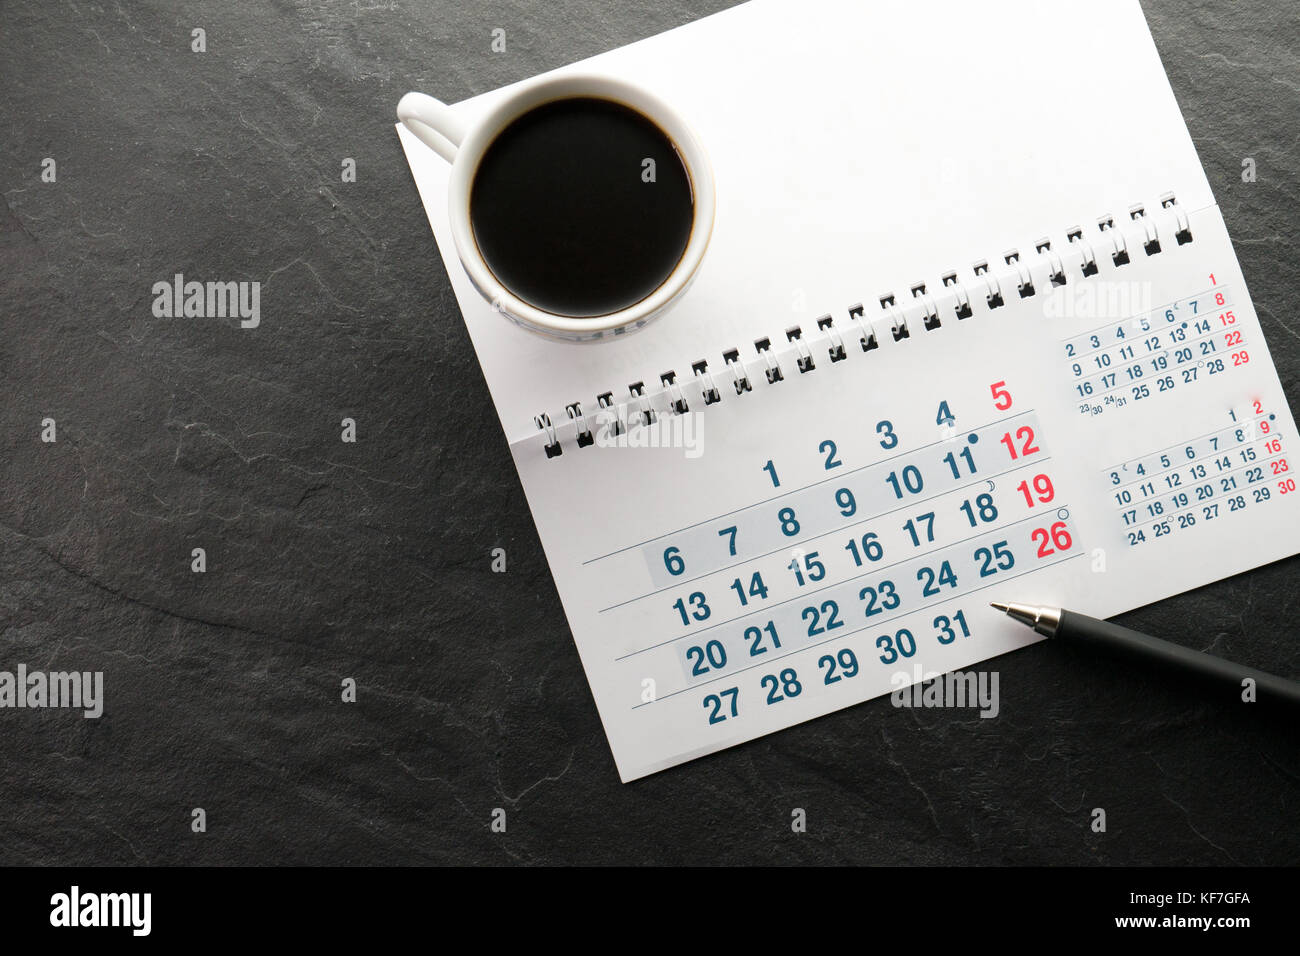 Black Friday, calendar, pen and cup with coffee free space horizontal Stock Photo